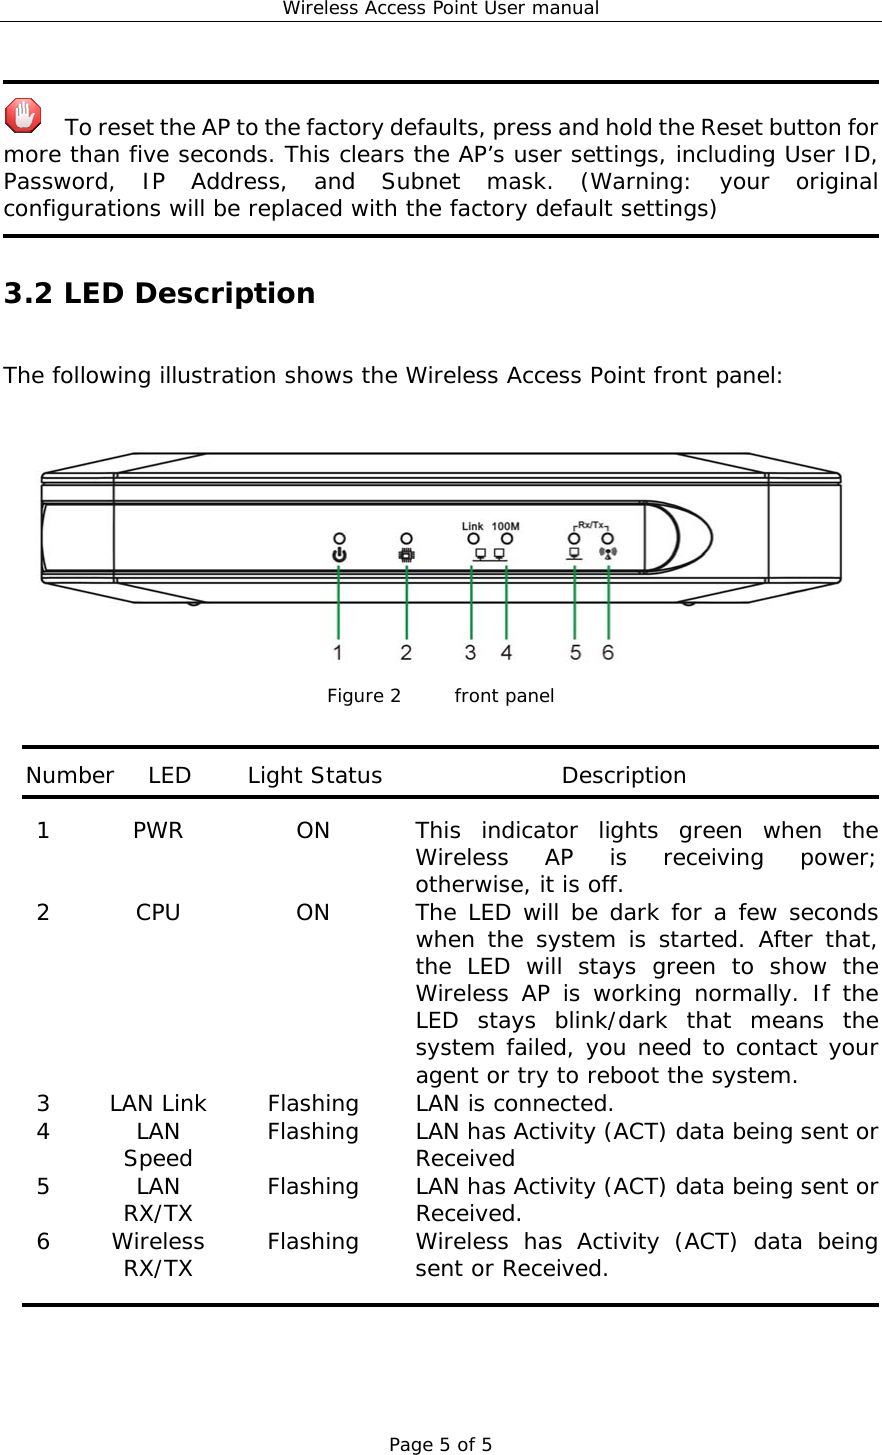 Wireless Access Point User manual Page 5 of 5      To reset the AP to the factory defaults, press and hold the Reset button for more than five seconds. This clears the AP’s user settings, including User ID, Password, IP Address, and Subnet mask. (Warning: your original configurations will be replaced with the factory default settings)  3.2 LED Description The following illustration shows the Wireless Access Point front panel:   Figure 2    front panel   Number   LED     Light Status                Description  1  PWR  ON  This indicator lights green when the Wireless AP is receiving power; otherwise, it is off. 2  CPU  ON  The LED will be dark for a few seconds when the system is started. After that, the LED will stays green to show the Wireless AP is working normally. If the LED stays blink/dark that means the system failed, you need to contact your agent or try to reboot the system. 3  LAN Link  Flashing  LAN is connected. 4 LAN Speed  Flashing  LAN has Activity (ACT) data being sent or Received 5 LAN RX/TX  Flashing  LAN has Activity (ACT) data being sent or Received. 6 Wireless RX/TX  Flashing  Wireless has Activity (ACT) data being sent or Received.    